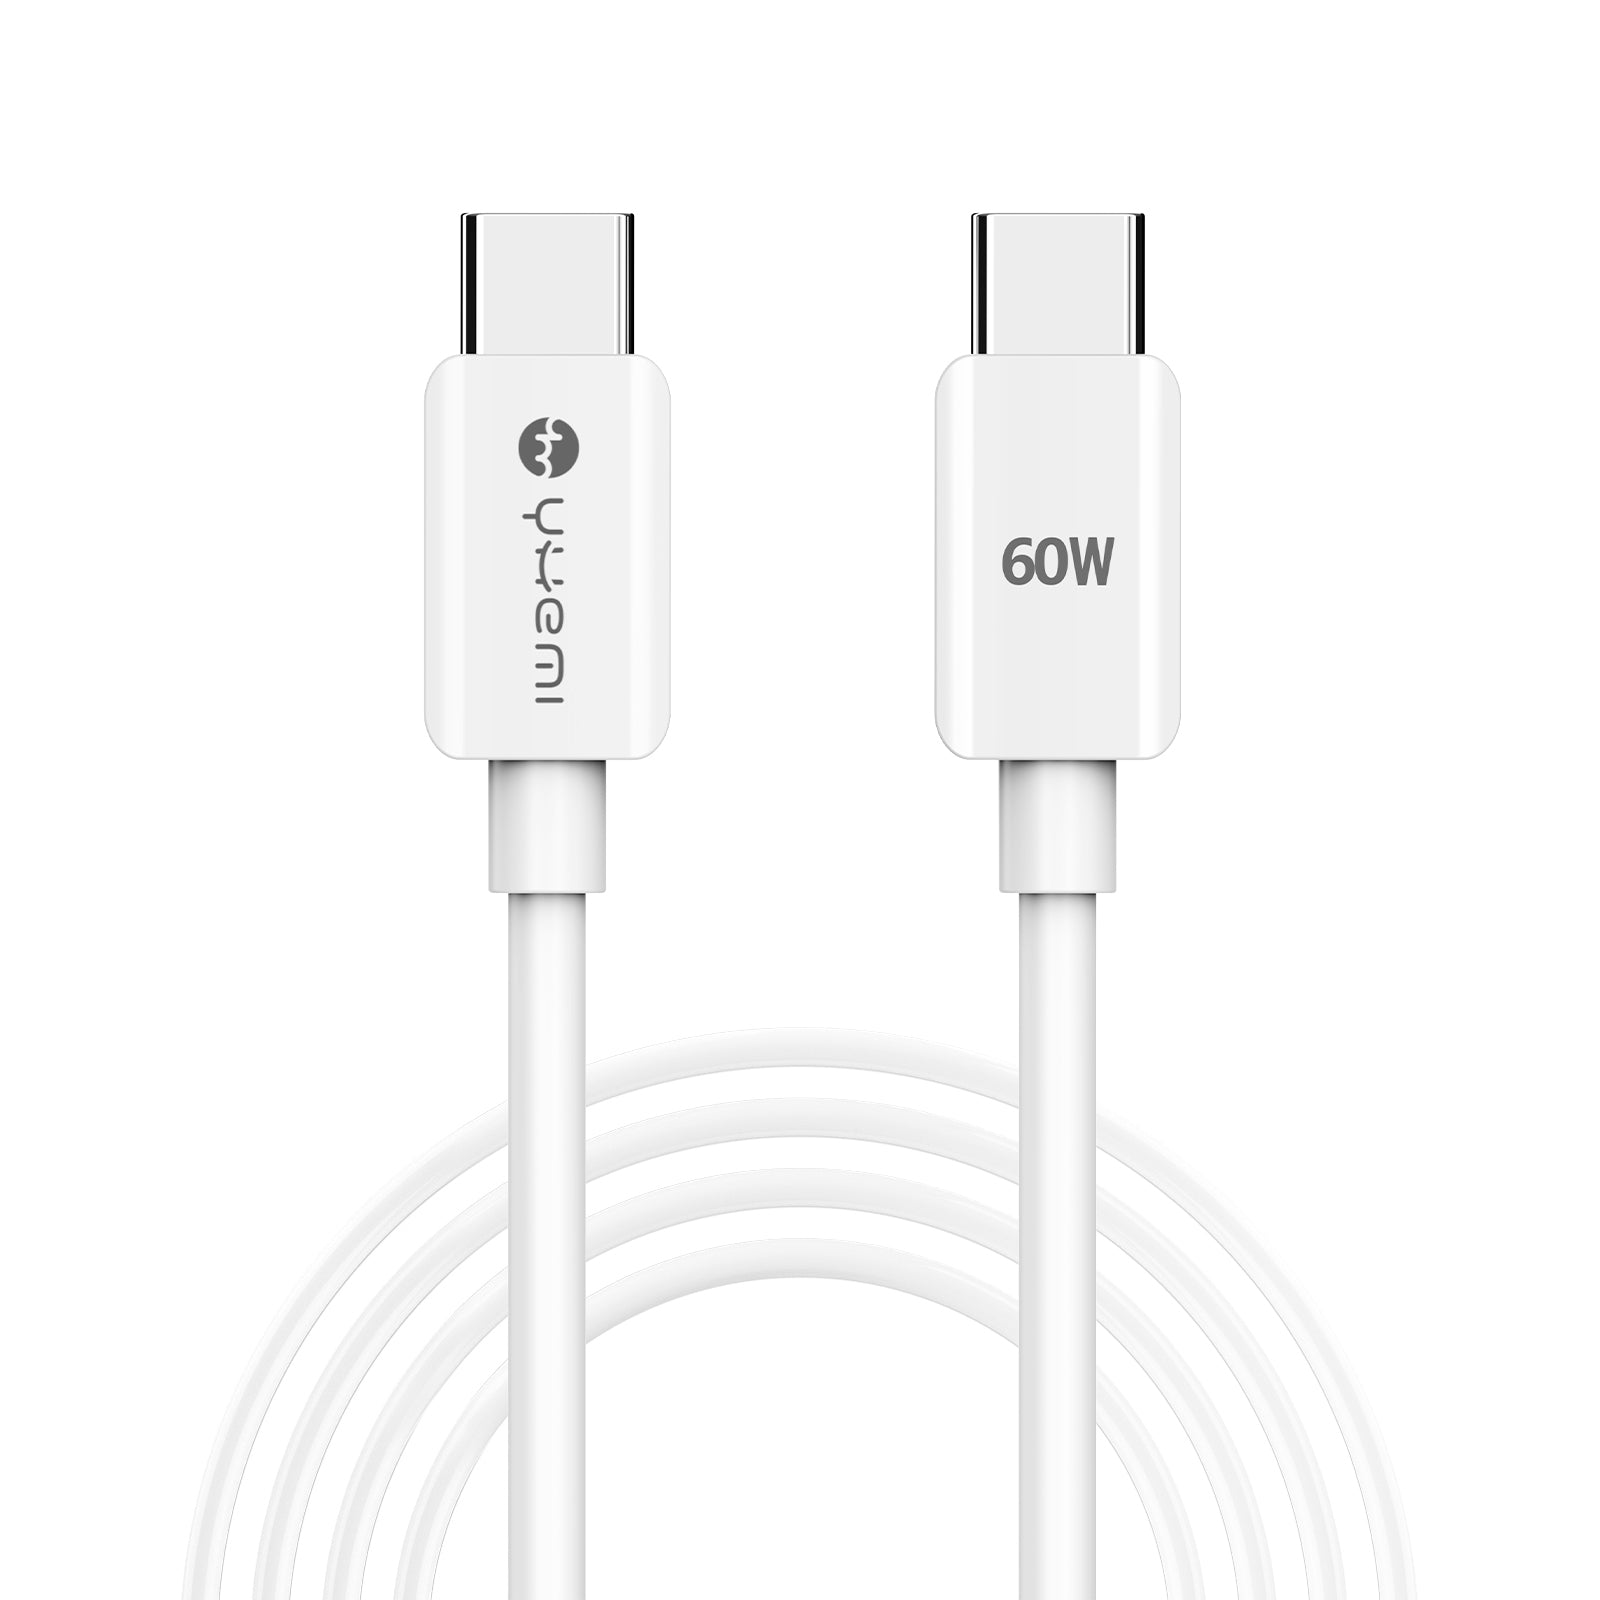 USB C to USB C Cable, TOTU 60W Type C to Type C Fast Charging Cable Compatible with MacBook Air/Pro, iPad Pro 12.9/11/Air/Mini, Samsung Galaxy S22/21/ 20/Note20 - TOTU